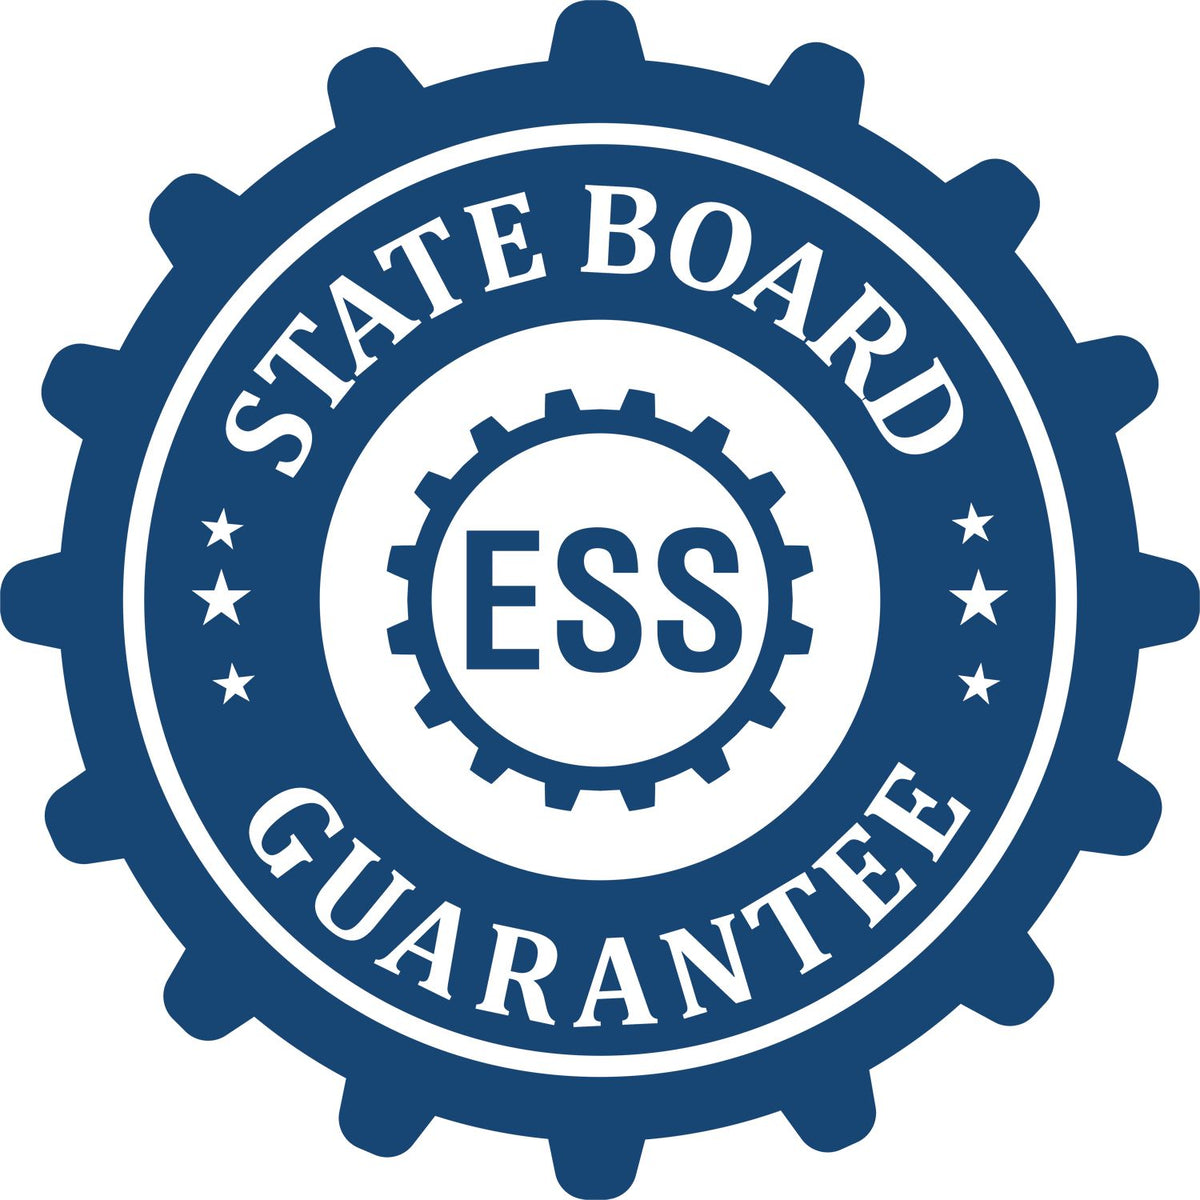 An emblem in a gear shape illustrating a state board guarantee for the Missouri Professional Engineer Seal Stamp product.